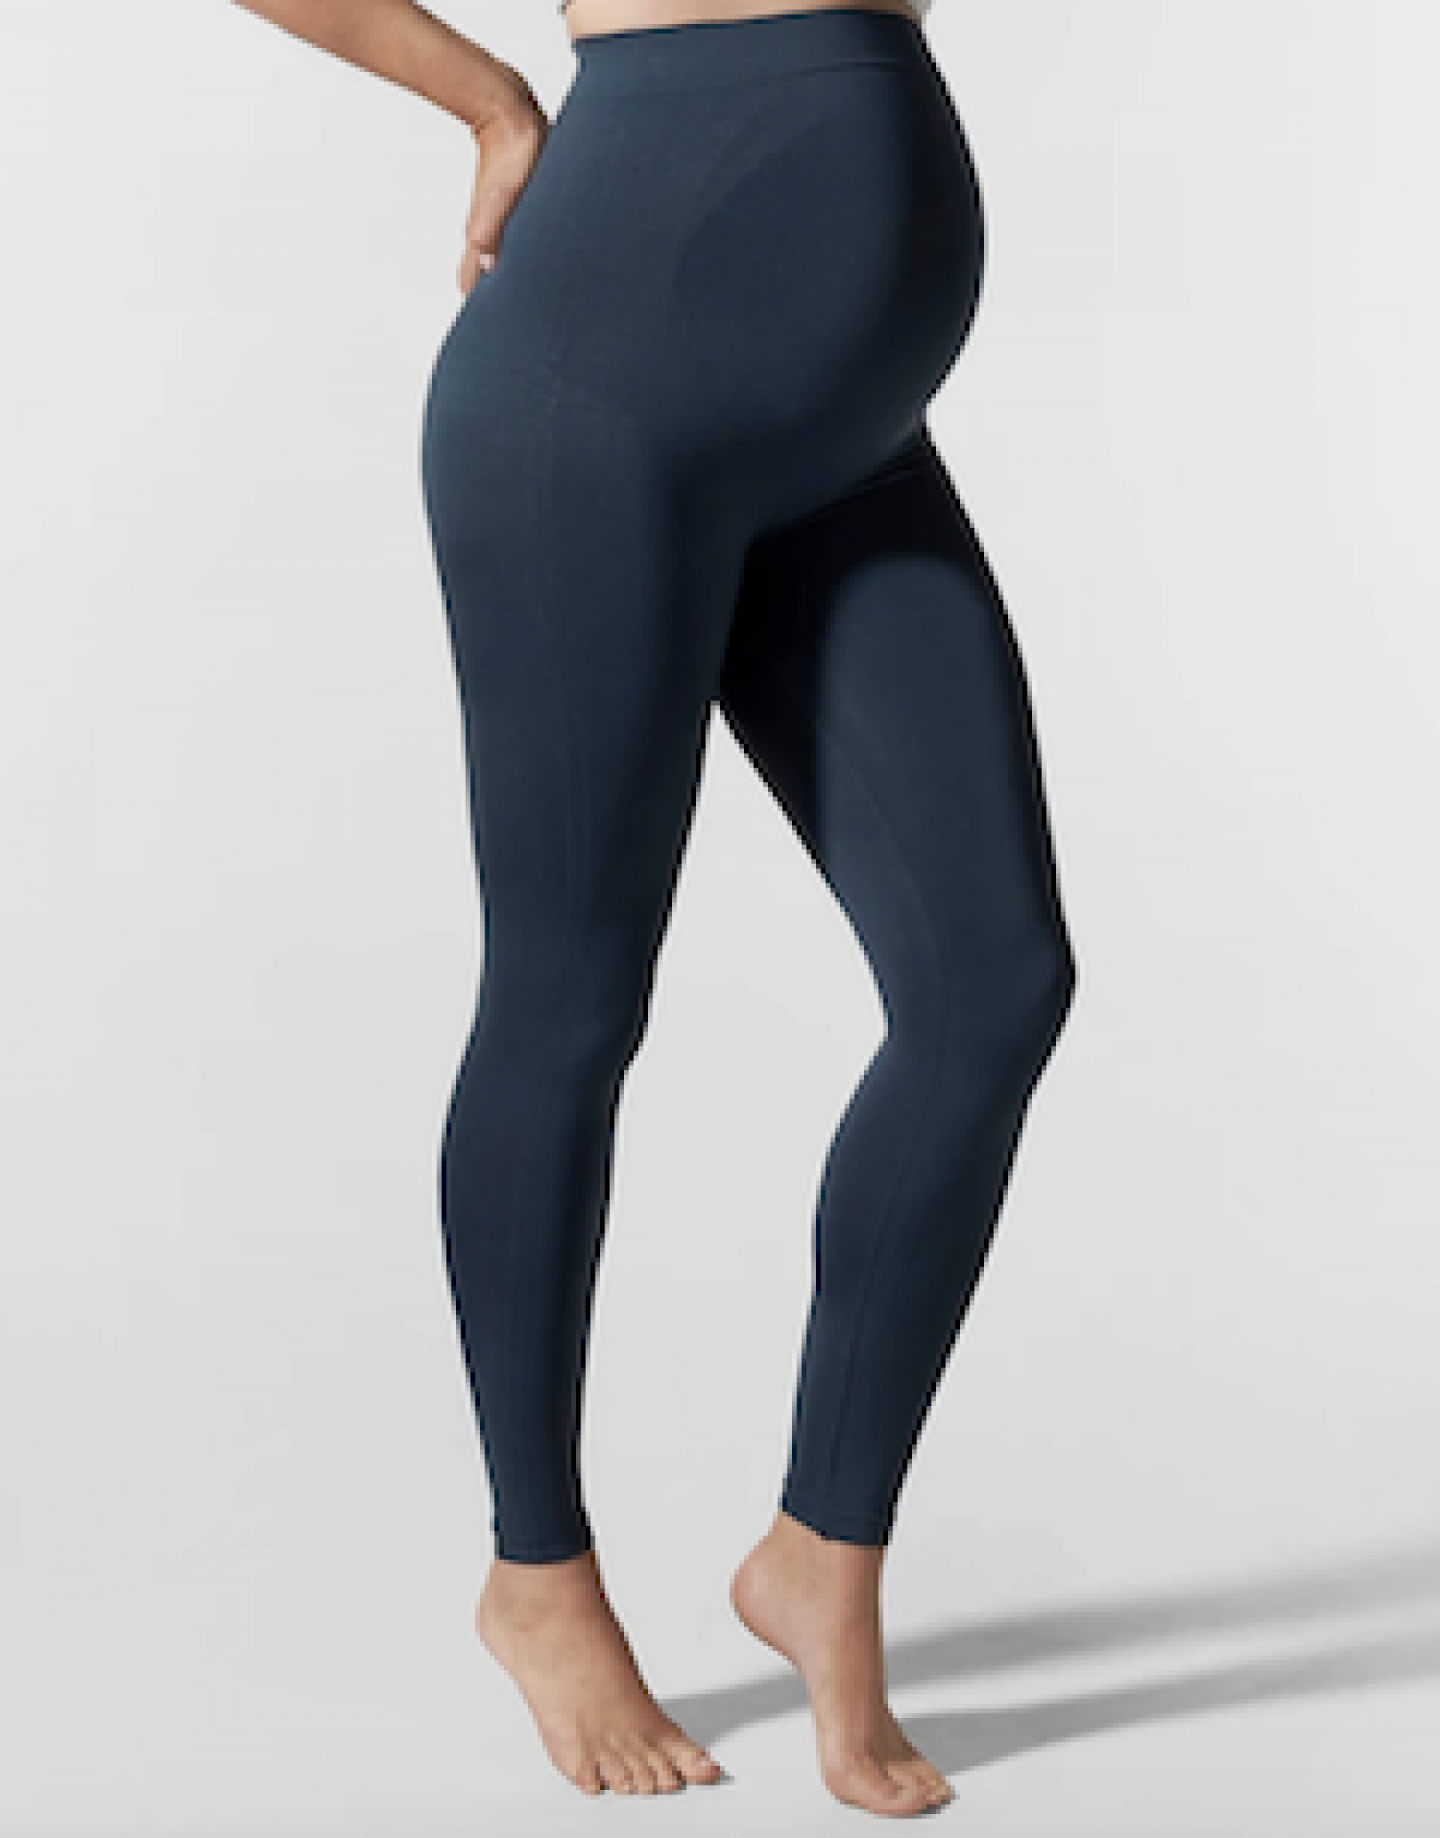 BLANQI Everyday™ Hipster Support Leggings